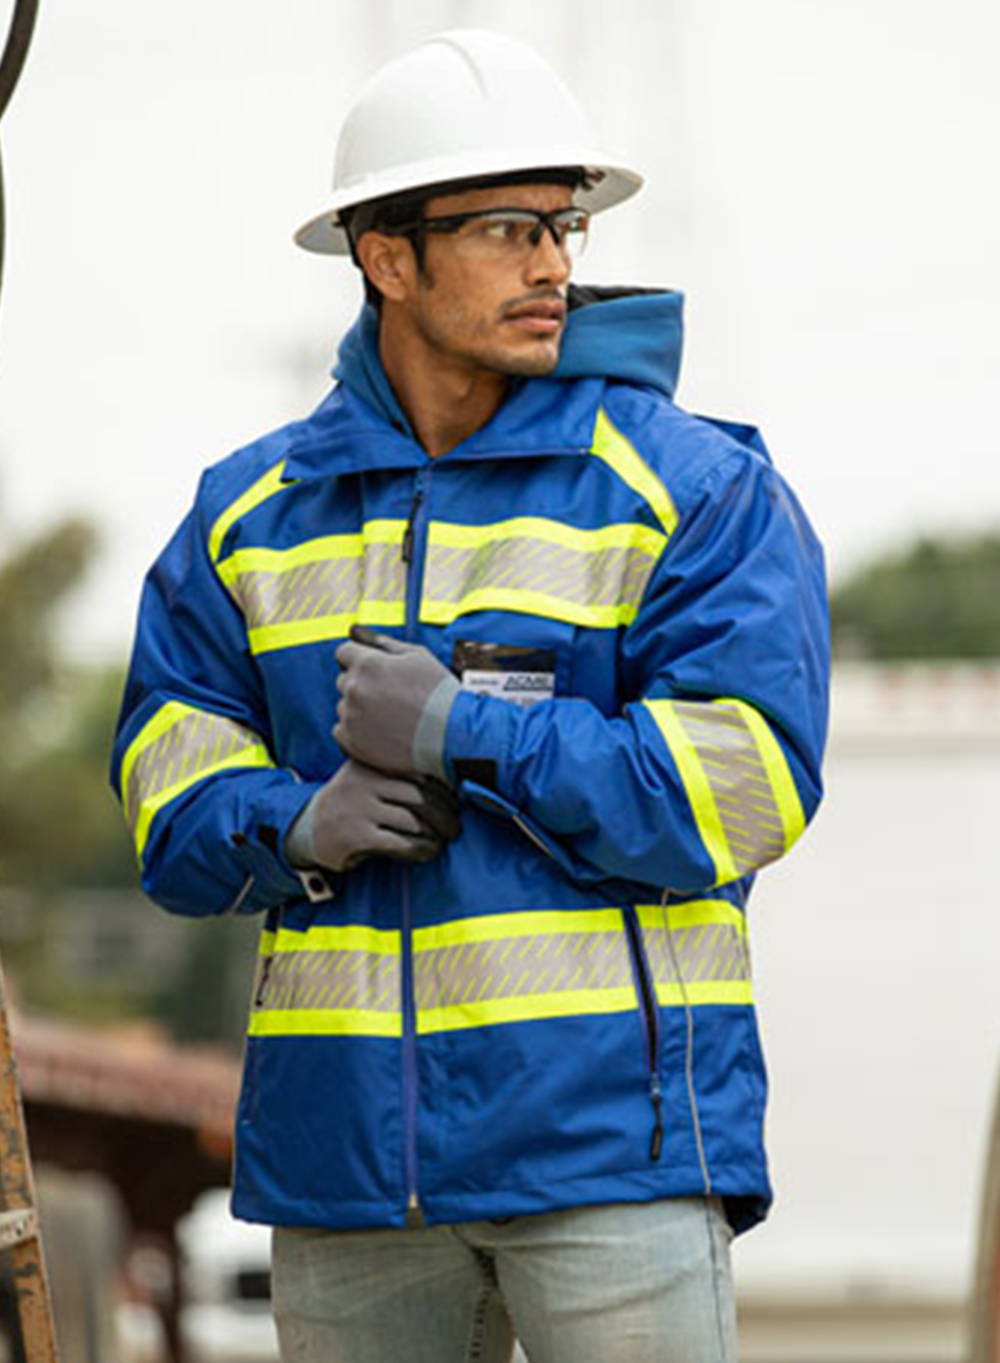 Construction worker wearing blue parka with hi-vis and reflective tape, and white hard hat with black rim safety glasses.